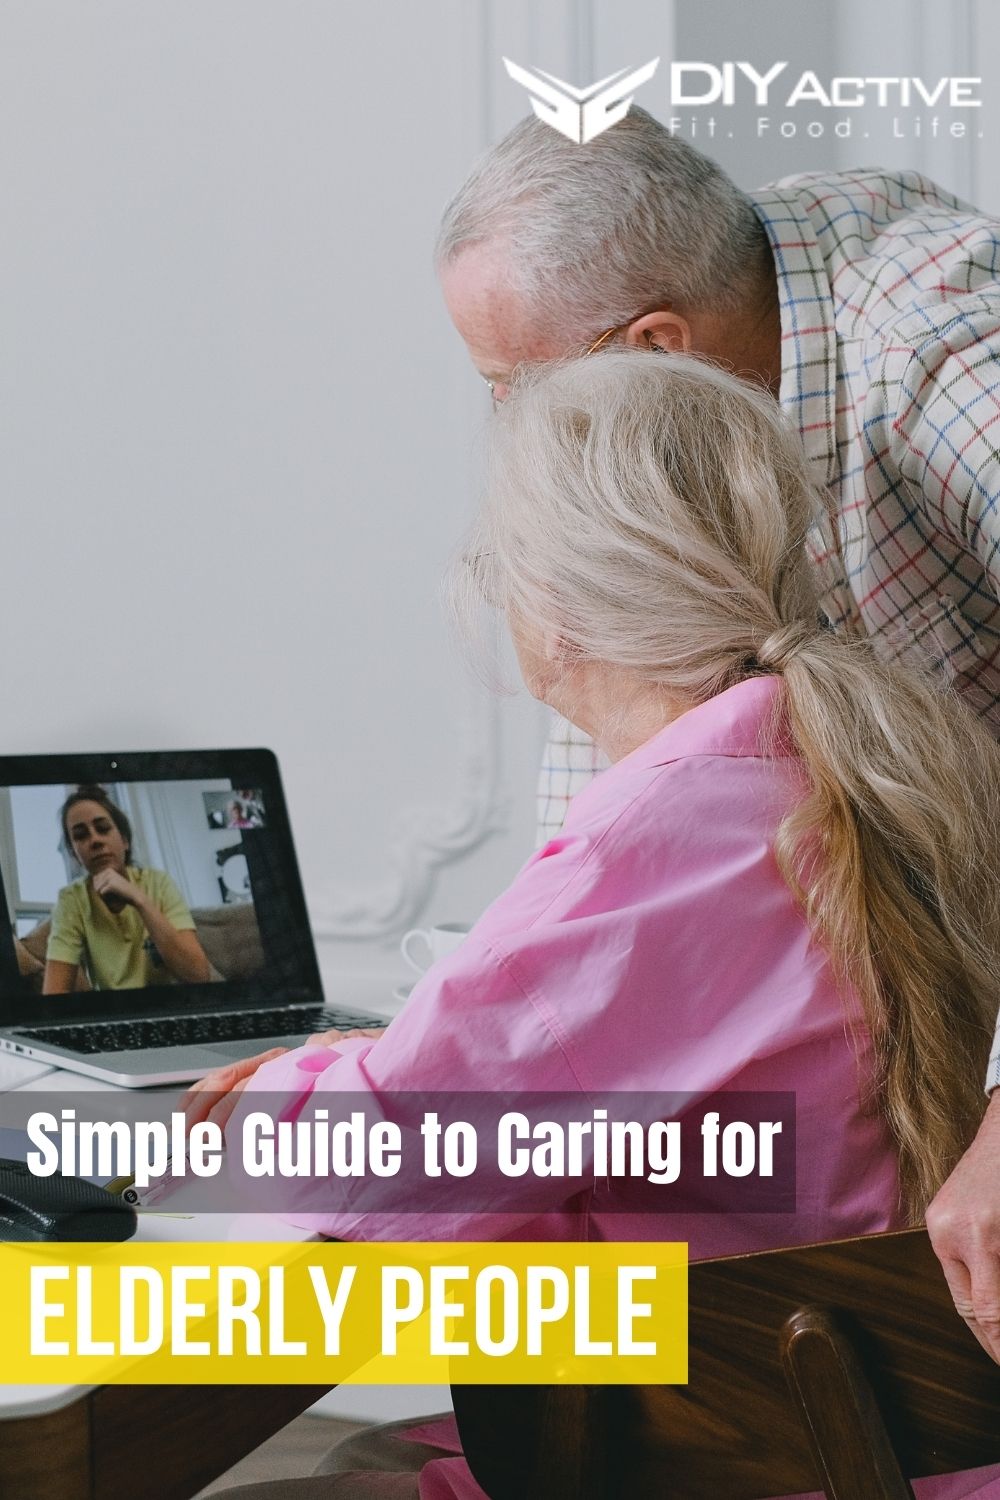 The Simple Guide to Caring for Elderly People 2